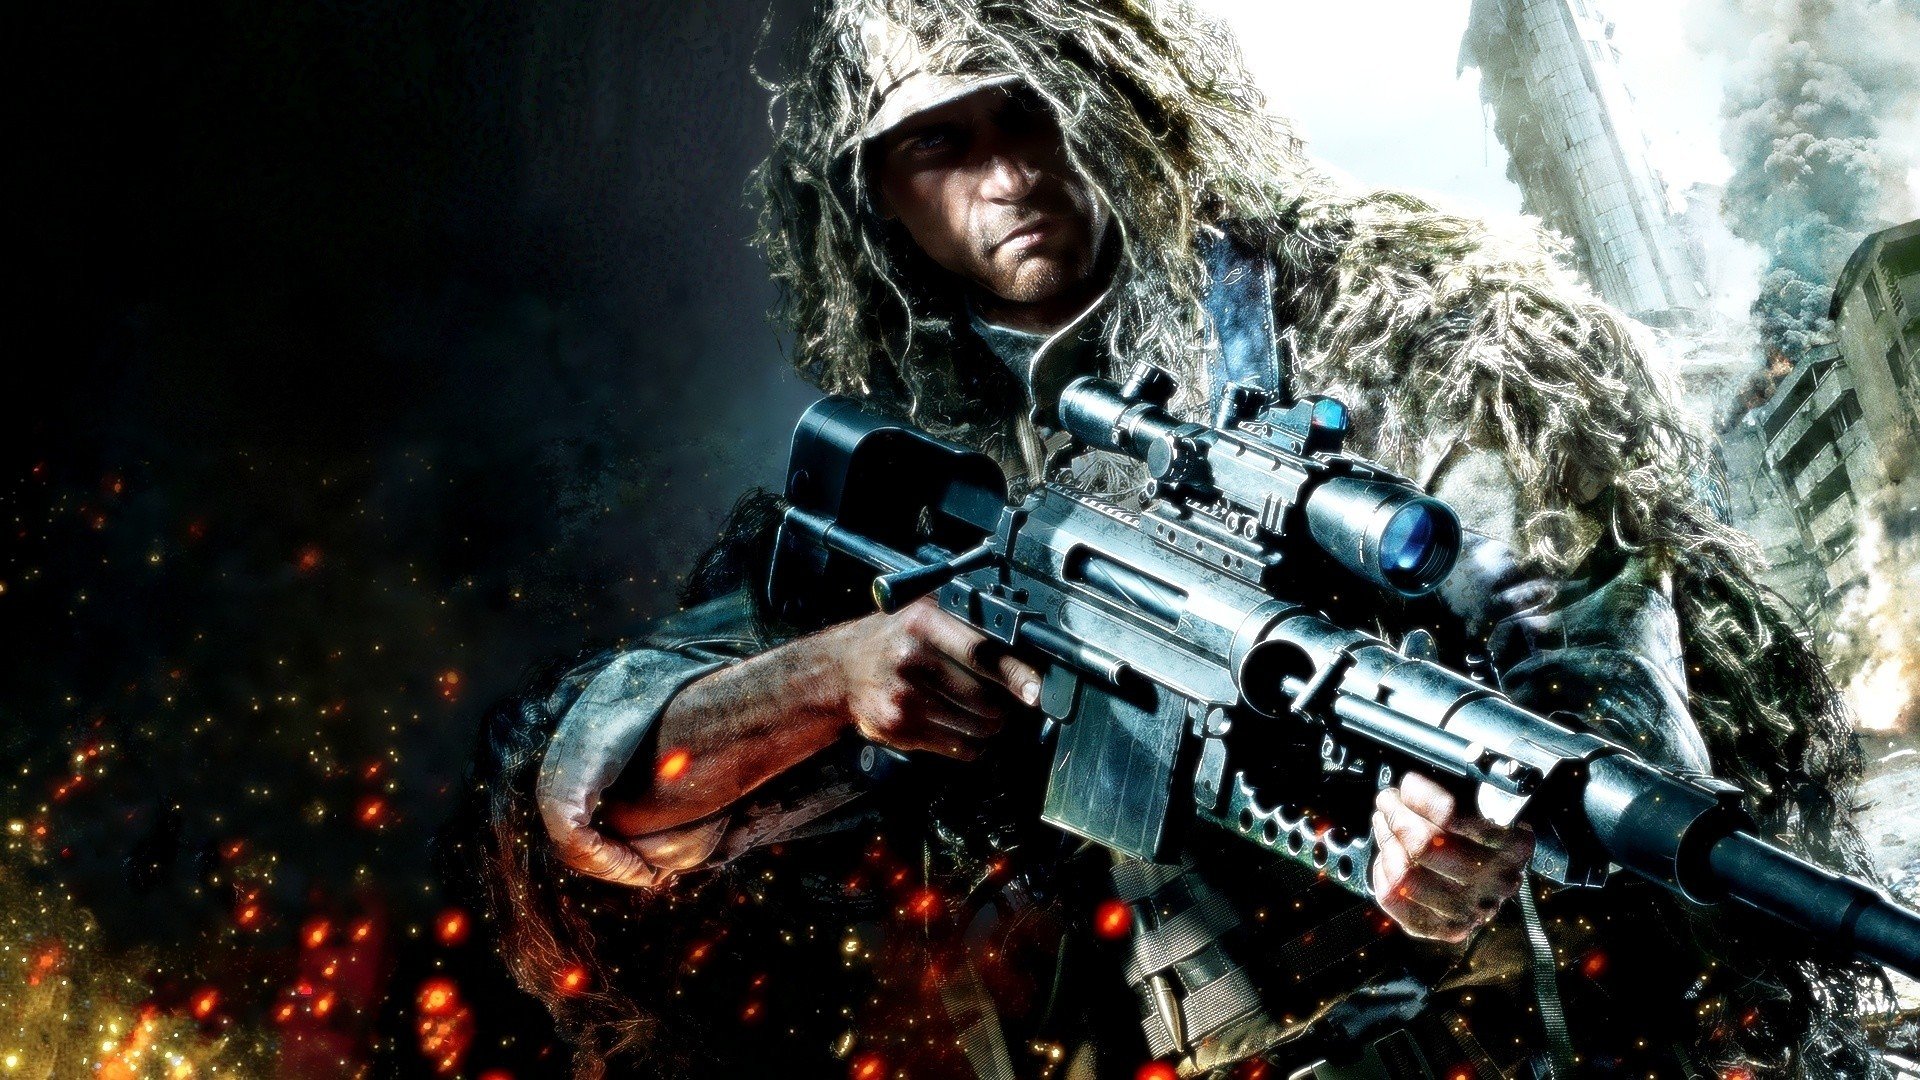 rifles, Soldiers, Video, Games, Ruins, Army, Military, Snipers, Buildings, Sniper, Rifles, Special, Forces Wallpaper